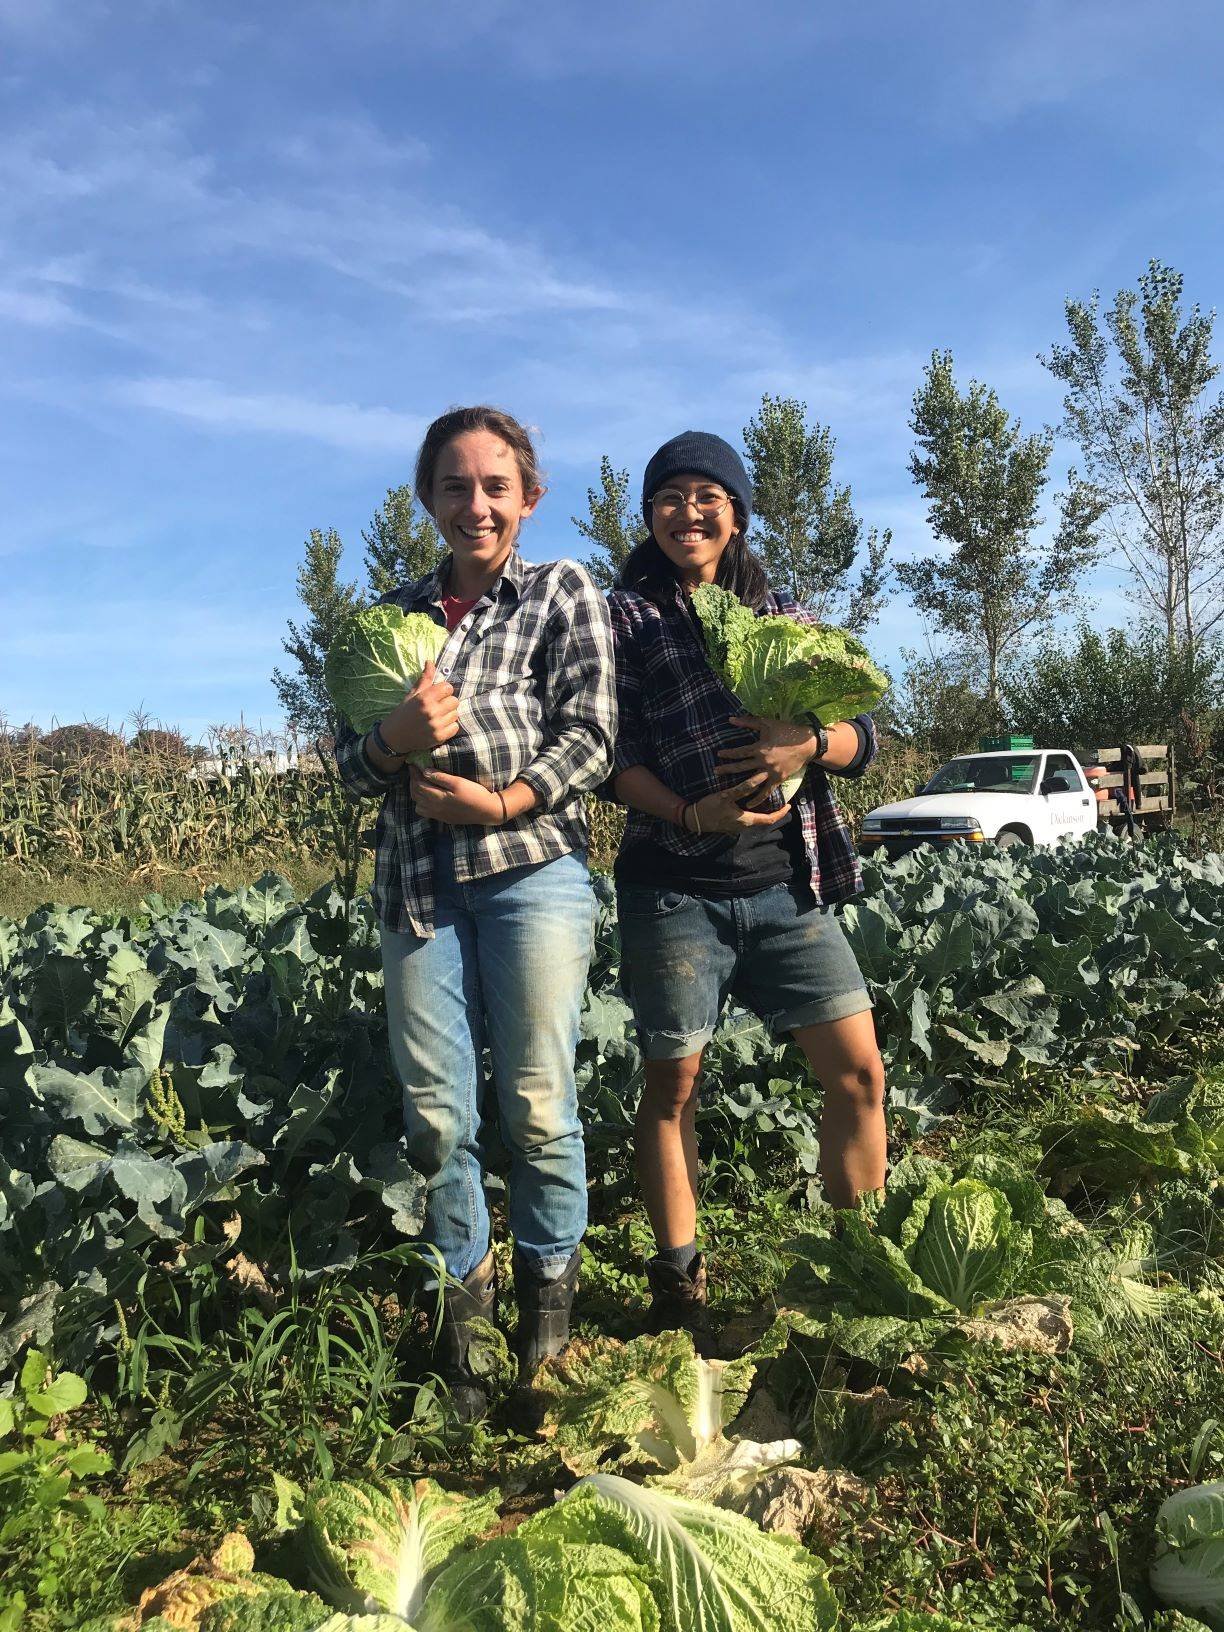 Friday CSA: Dickinson College Farm Field Notes for Week of September 30th